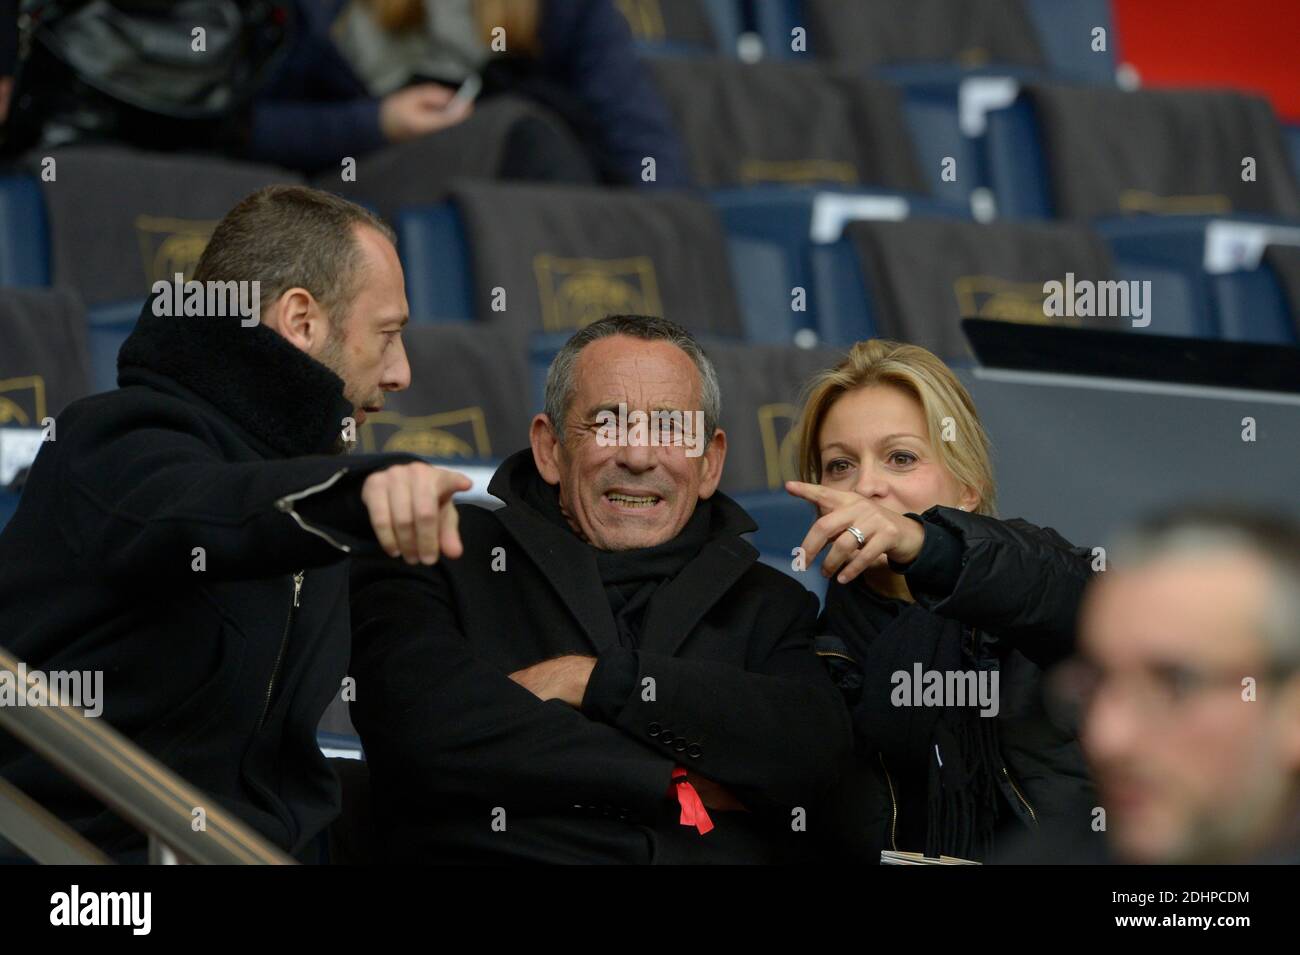 Thierry Ardisson and his wife Audrey Crespo-Mara during the French First League soccer match, Paris-St-Germain vs Reims in Parc des Princes, Paris, France on February 20th, 2016. PSG won 4-1. Photo by Henri Szwarc/ABACAPRESS.COM Stock Photo